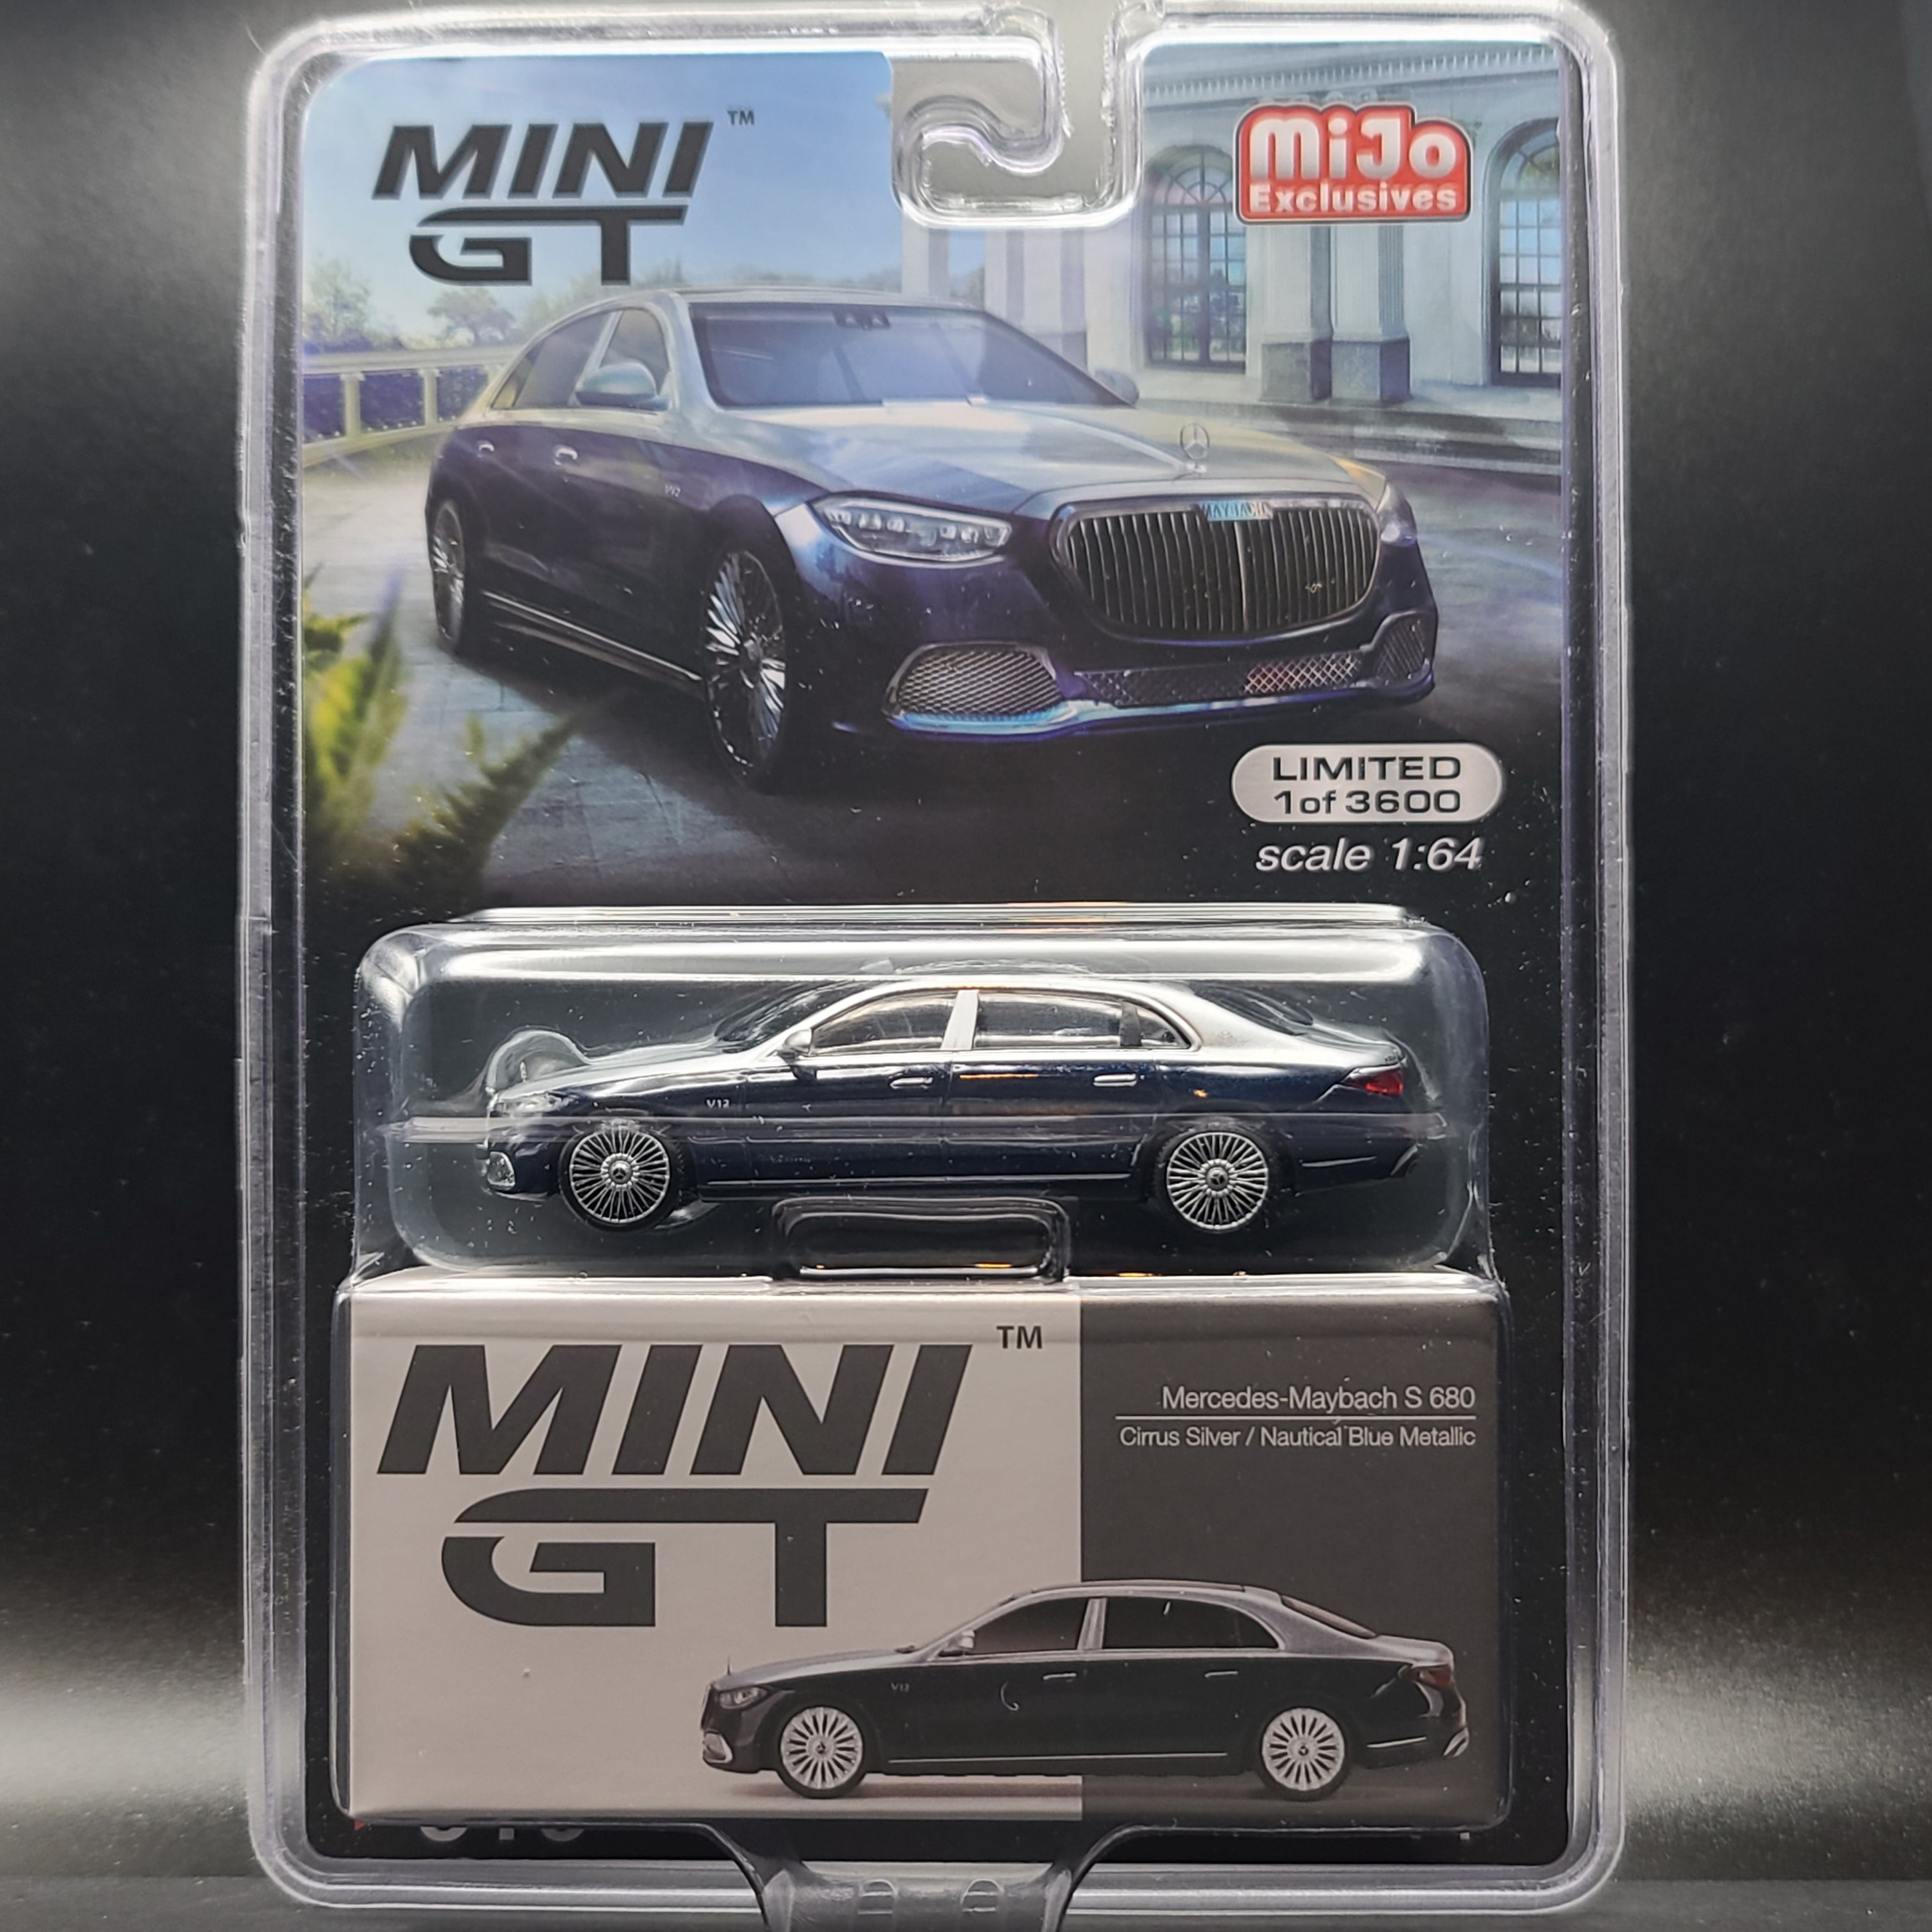 MINI GT Mercedes-Maybach S 680 - 1:64 scale, Cirrus Silver / Nautical Blue  (2024 MIJO Exclusives - Limited Edition 1 of 3600)